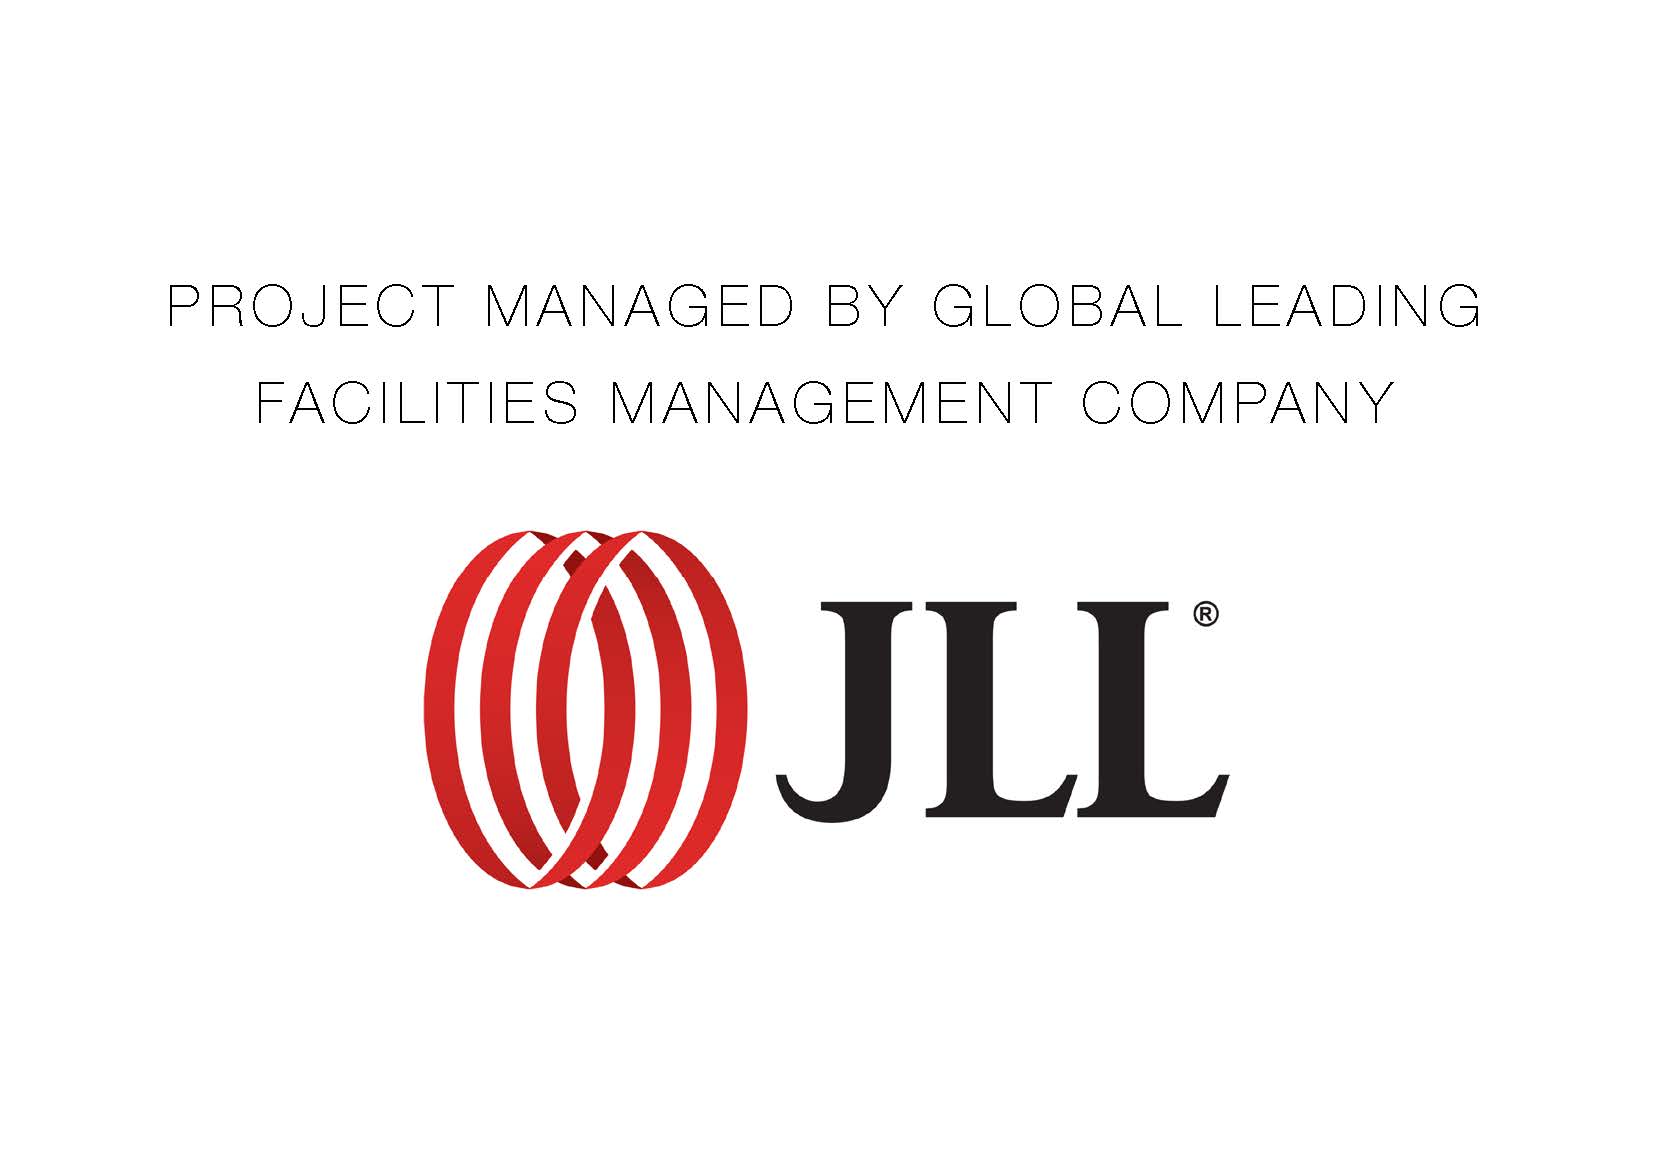 Godrej Summit project managed by leading management company JLL Update